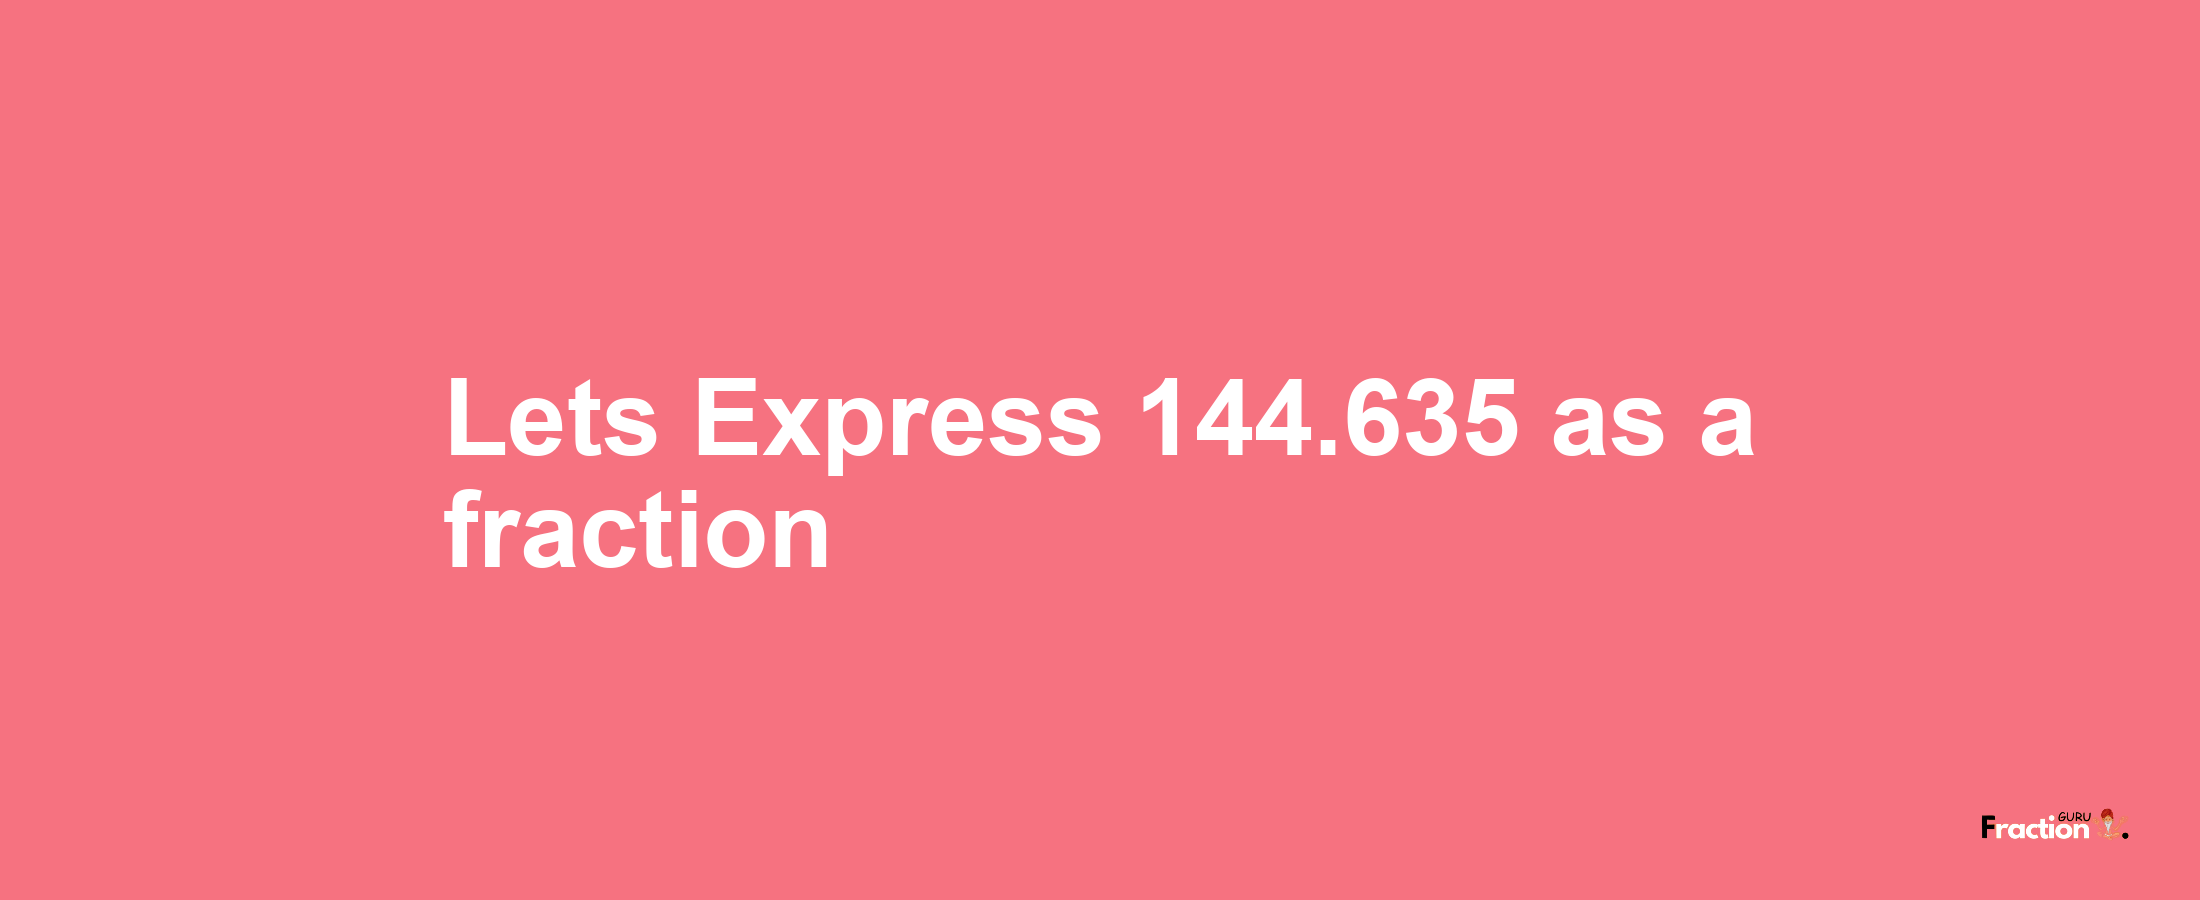 Lets Express 144.635 as afraction